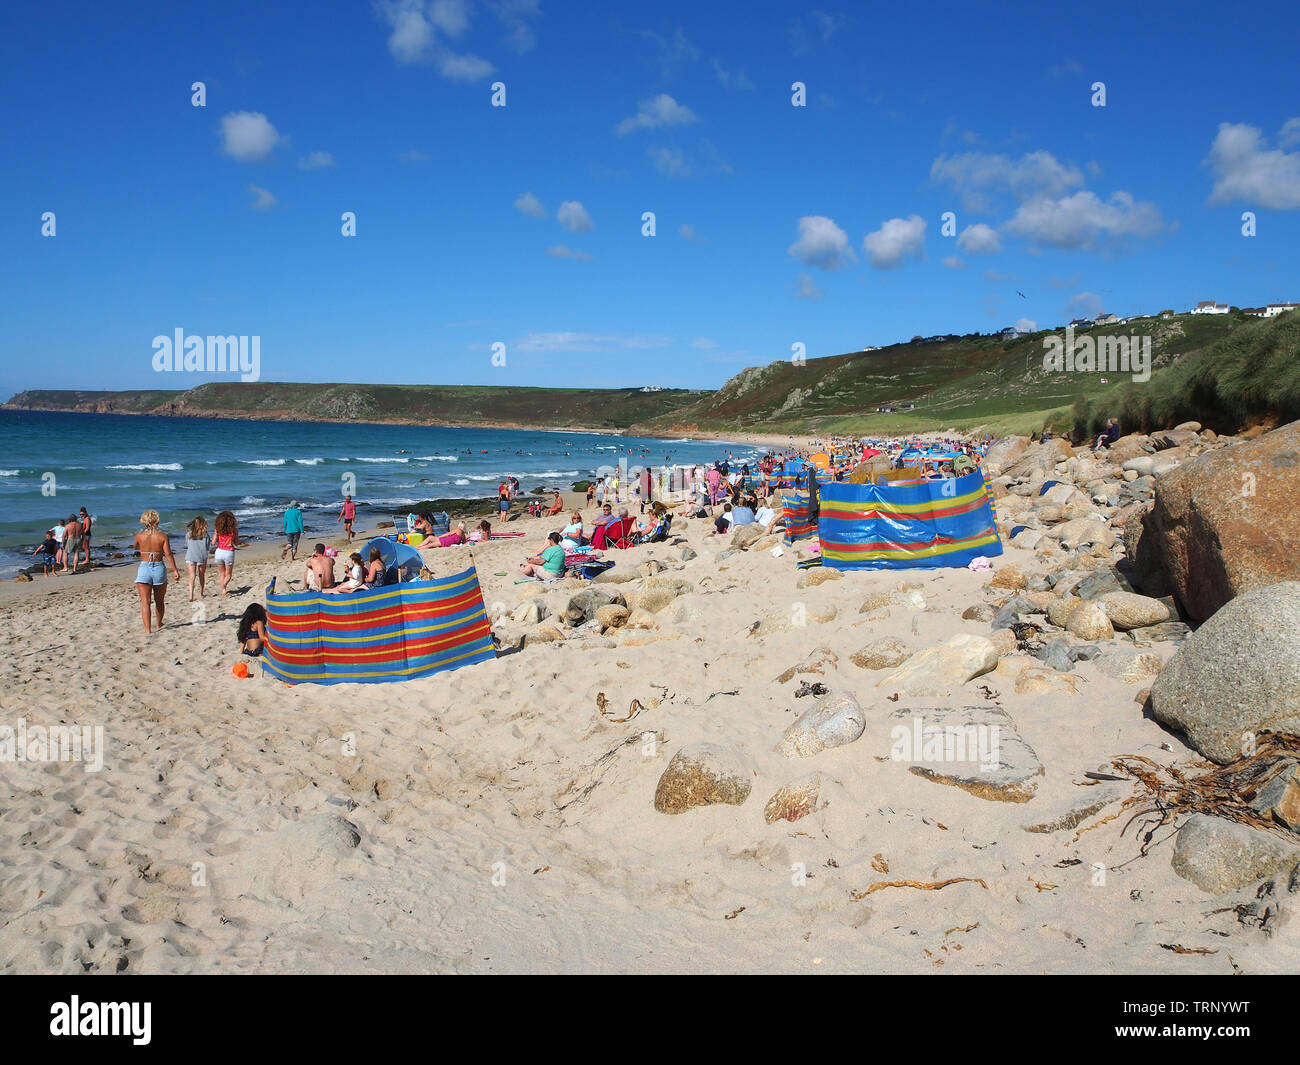 People enjoying sunny summers day on the beach in Sennen Cove, Cornwall, England, UK showing the sandy beach and blue sea under a blue sky. Stock Photo